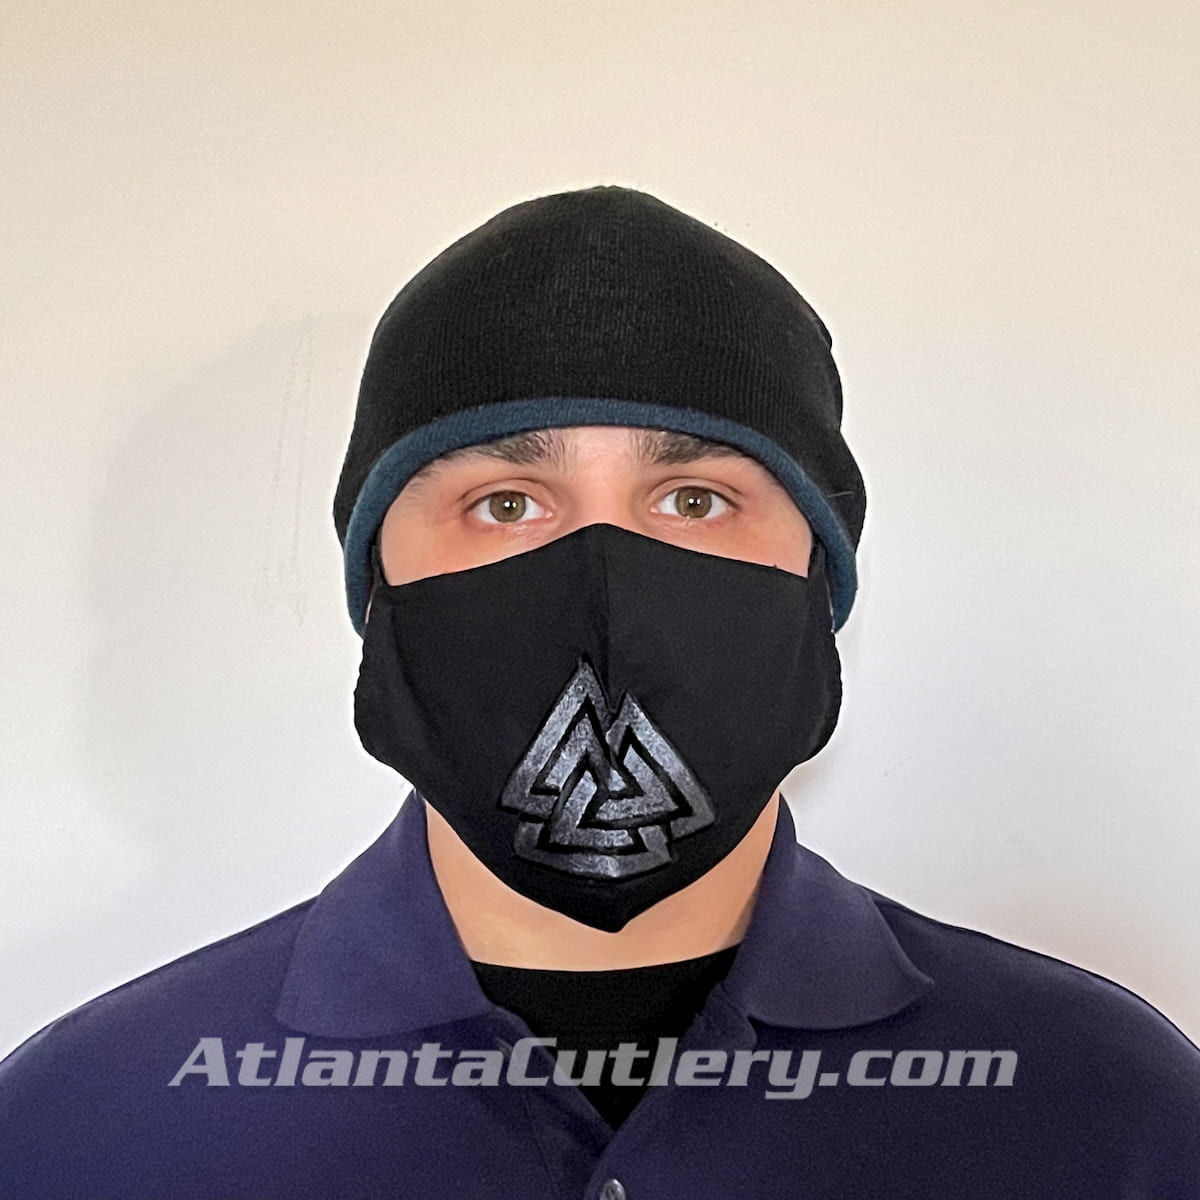 Black Cotton Face Mask with silk embroidered Viking Valknut, adjustable straps and pocket for disposable filter